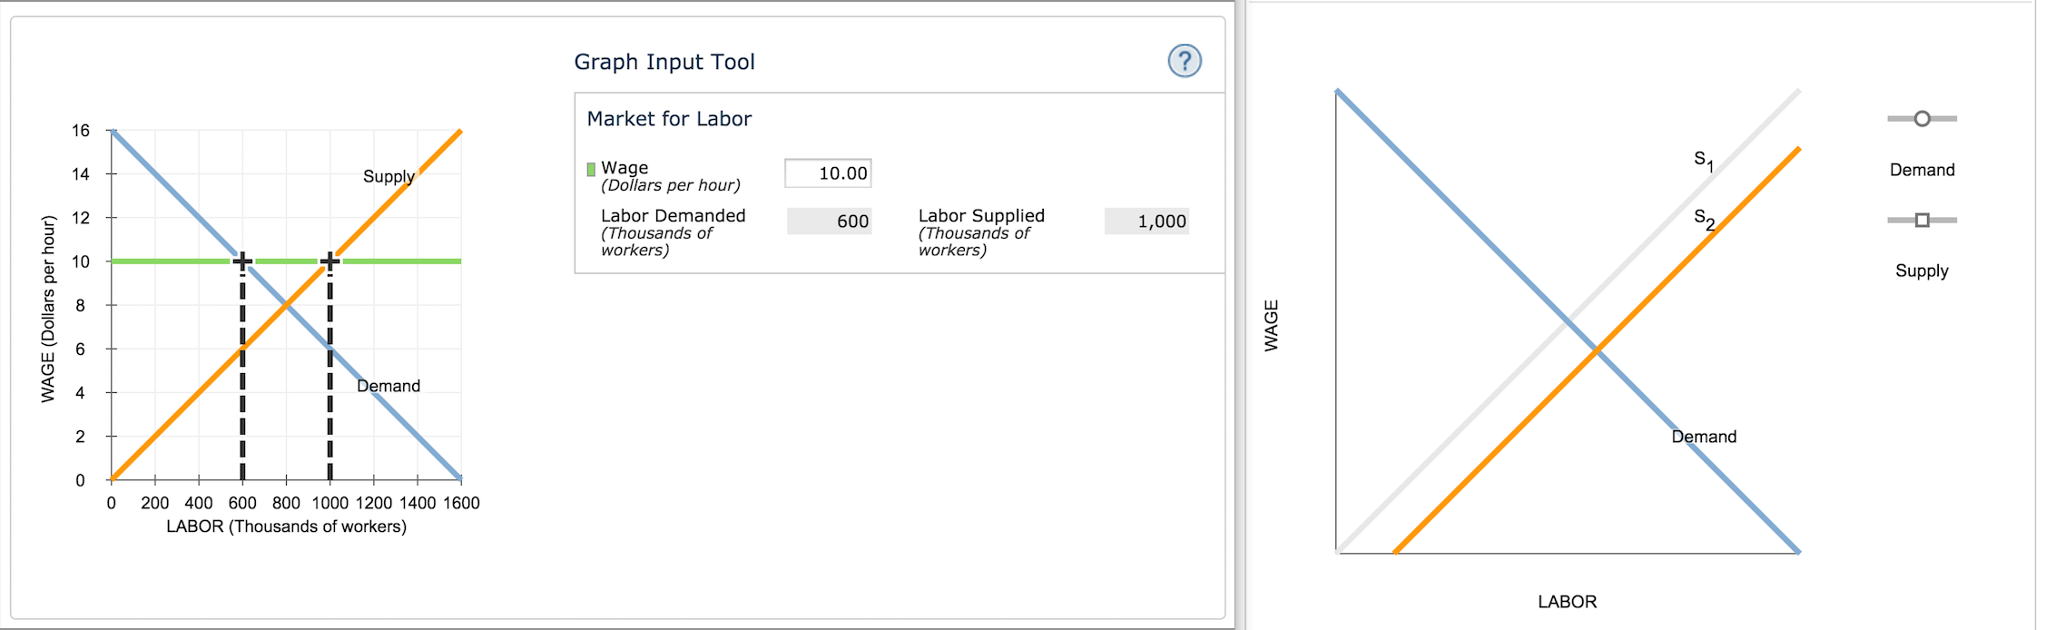 Graph Input Tool Market for Labor 16 Wage (Dollars per hour) 14 Suppl 10.00 Demand Labor Demanded (Thousands of workers) 0 2 Labor Supplied Thousands of workers) 600 8 1,000 10 Supply emand 2 Demand 0 200 400 600 800 1000 1200 1400 1600 2 LABOR (Thousands of workers) LABOR